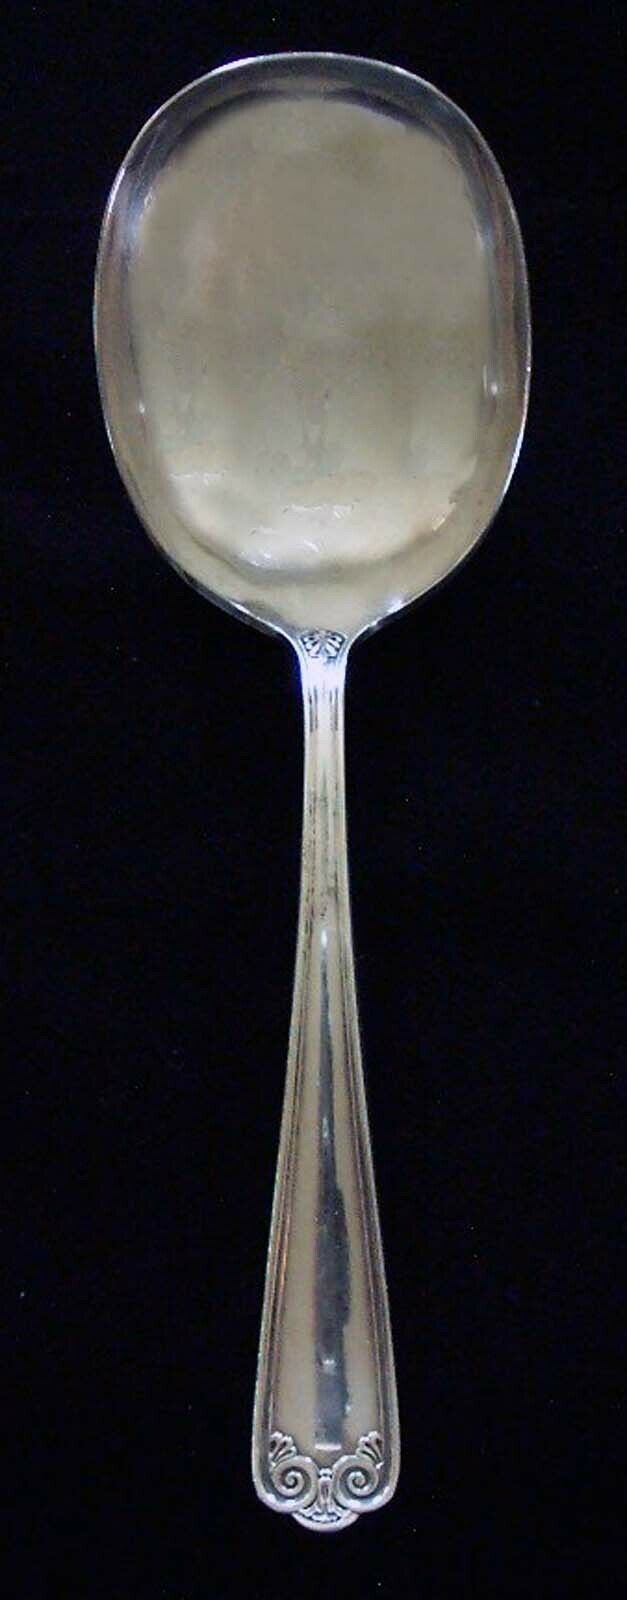 1914 issue "1835 R. Wallace A1" Silverplate Pat. Nov 24, 1914 - Serving Spoon - $49.95